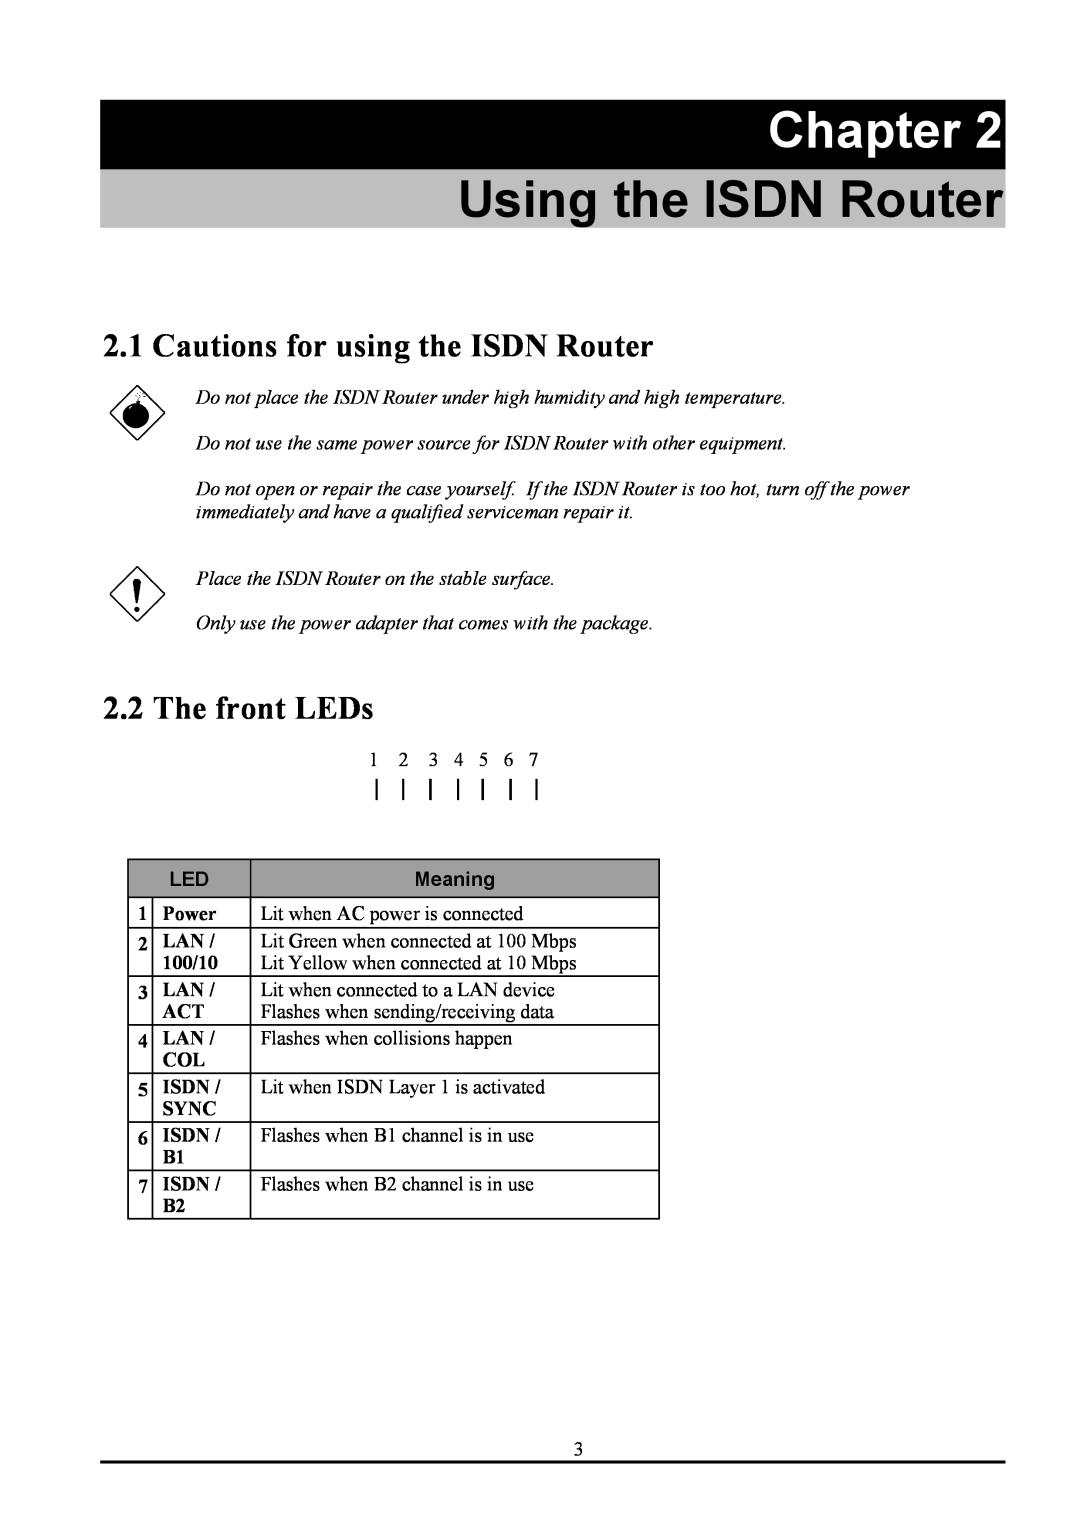 Atlantis Land ATLMMR MNE01 Using the ISDN Router, Cautions for using the ISDN Router, The front LEDs, Chapter, Meaning 